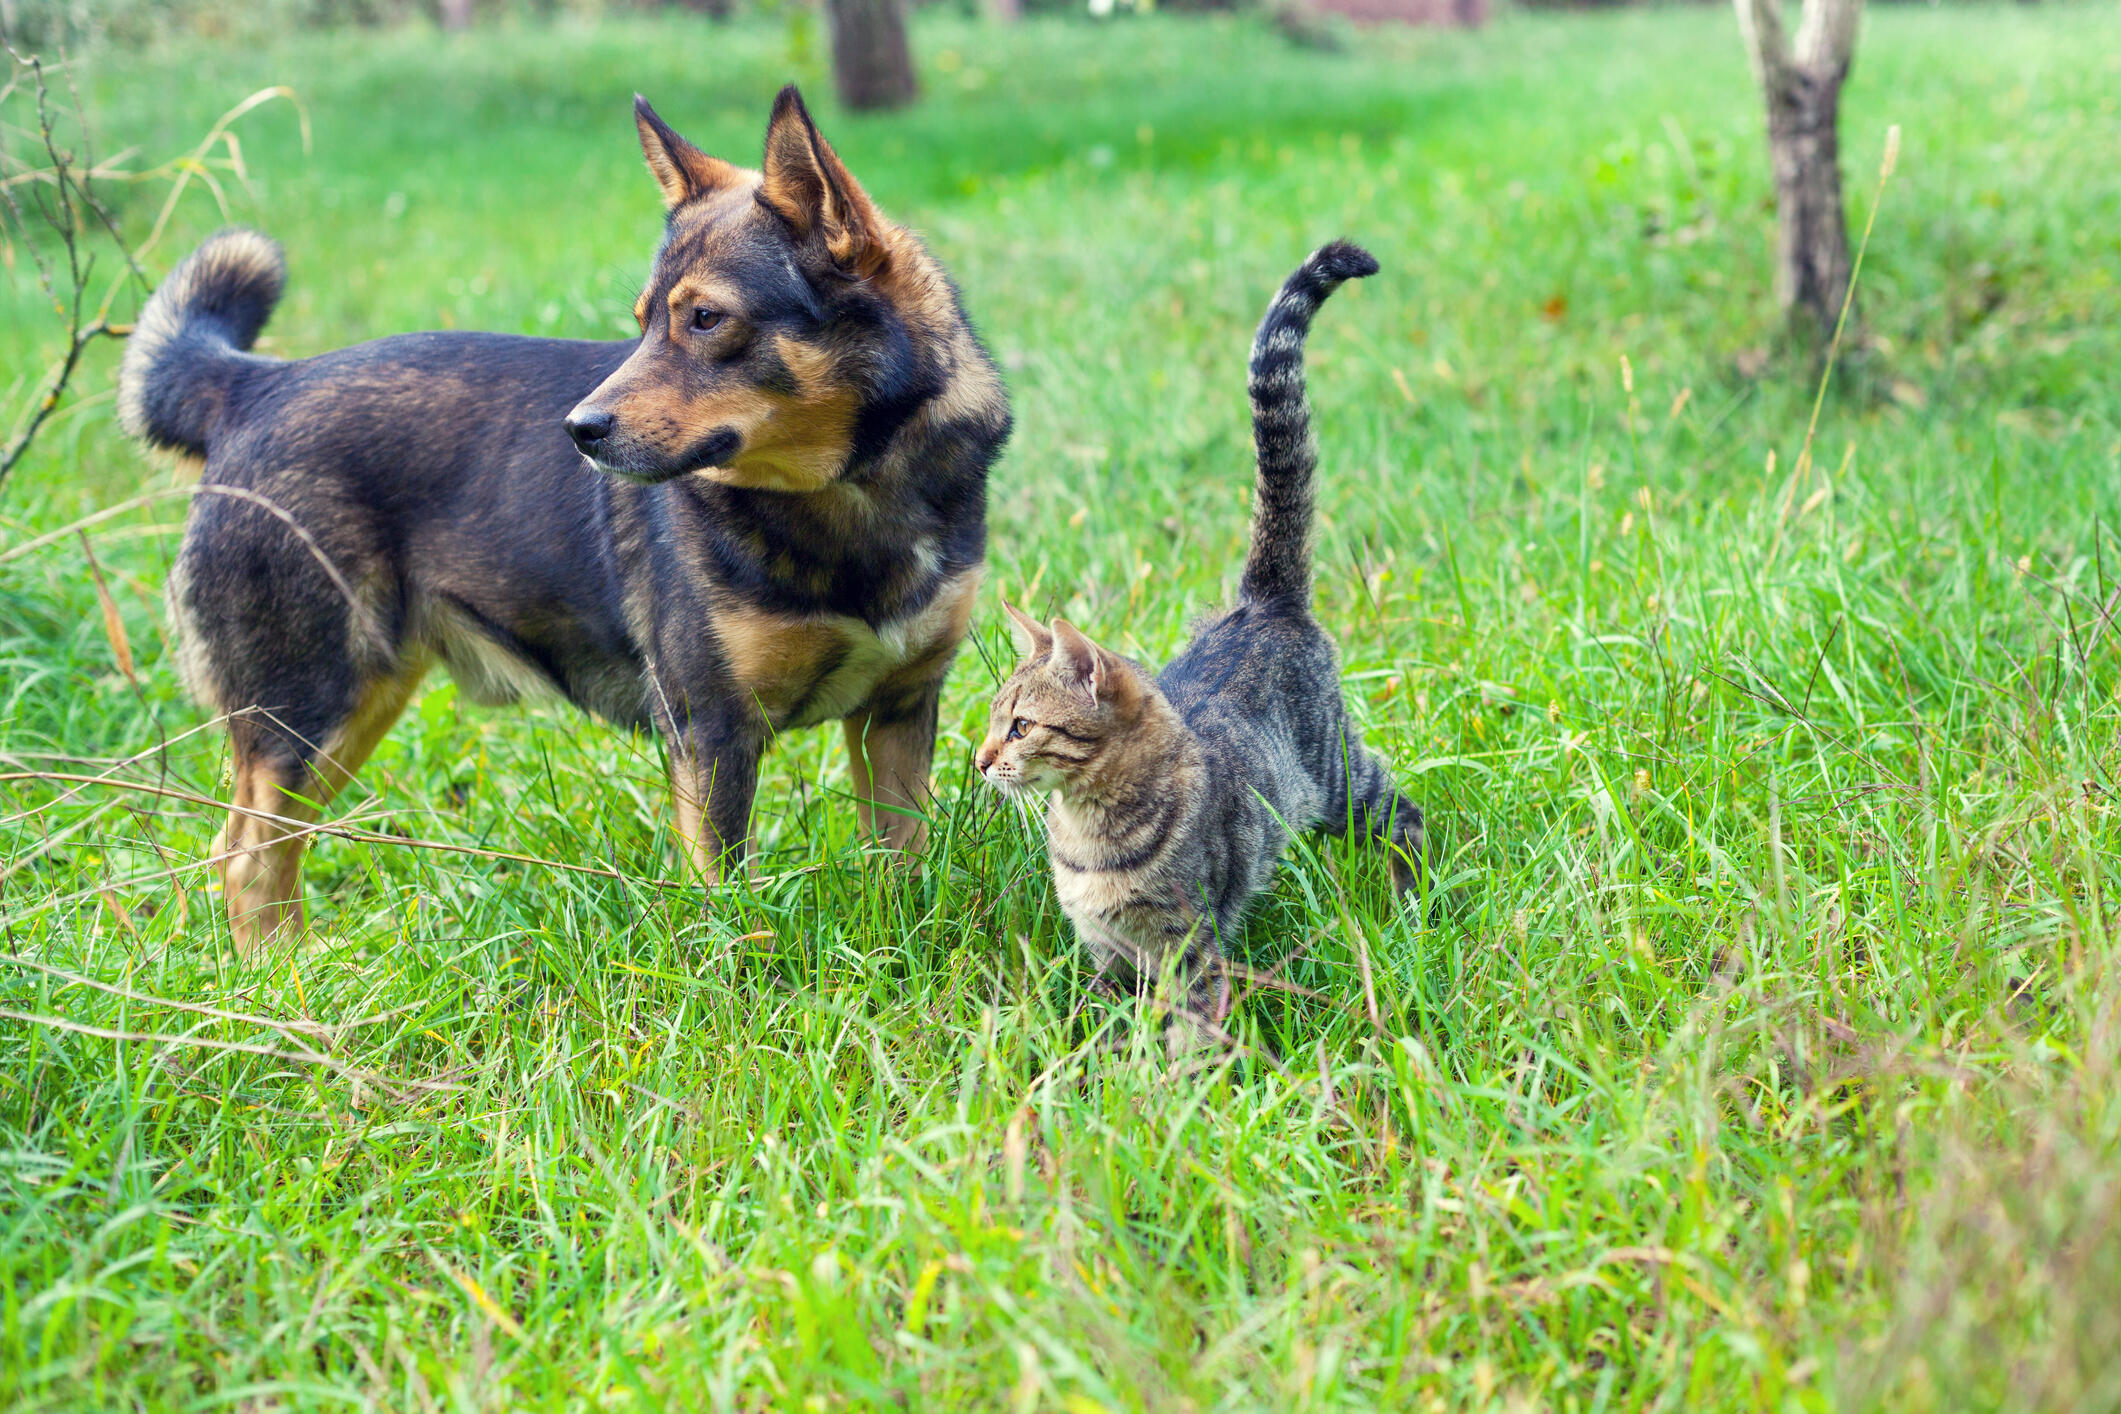 Dog and cat best friends walking together outdoor on the grass